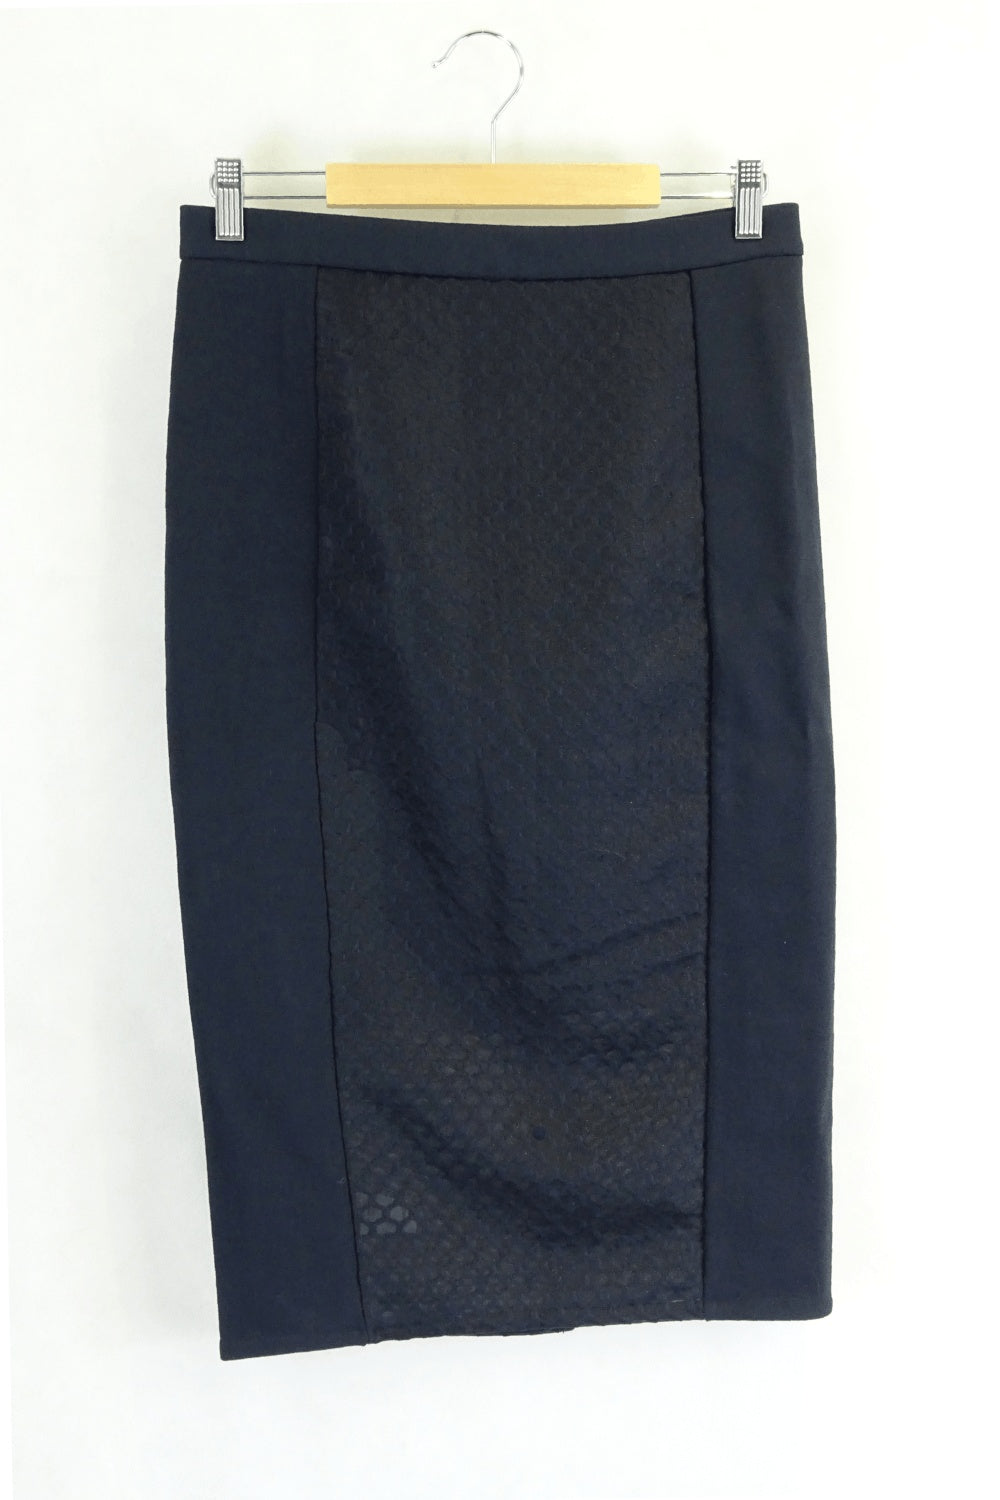 Country Road Navy Skirt M